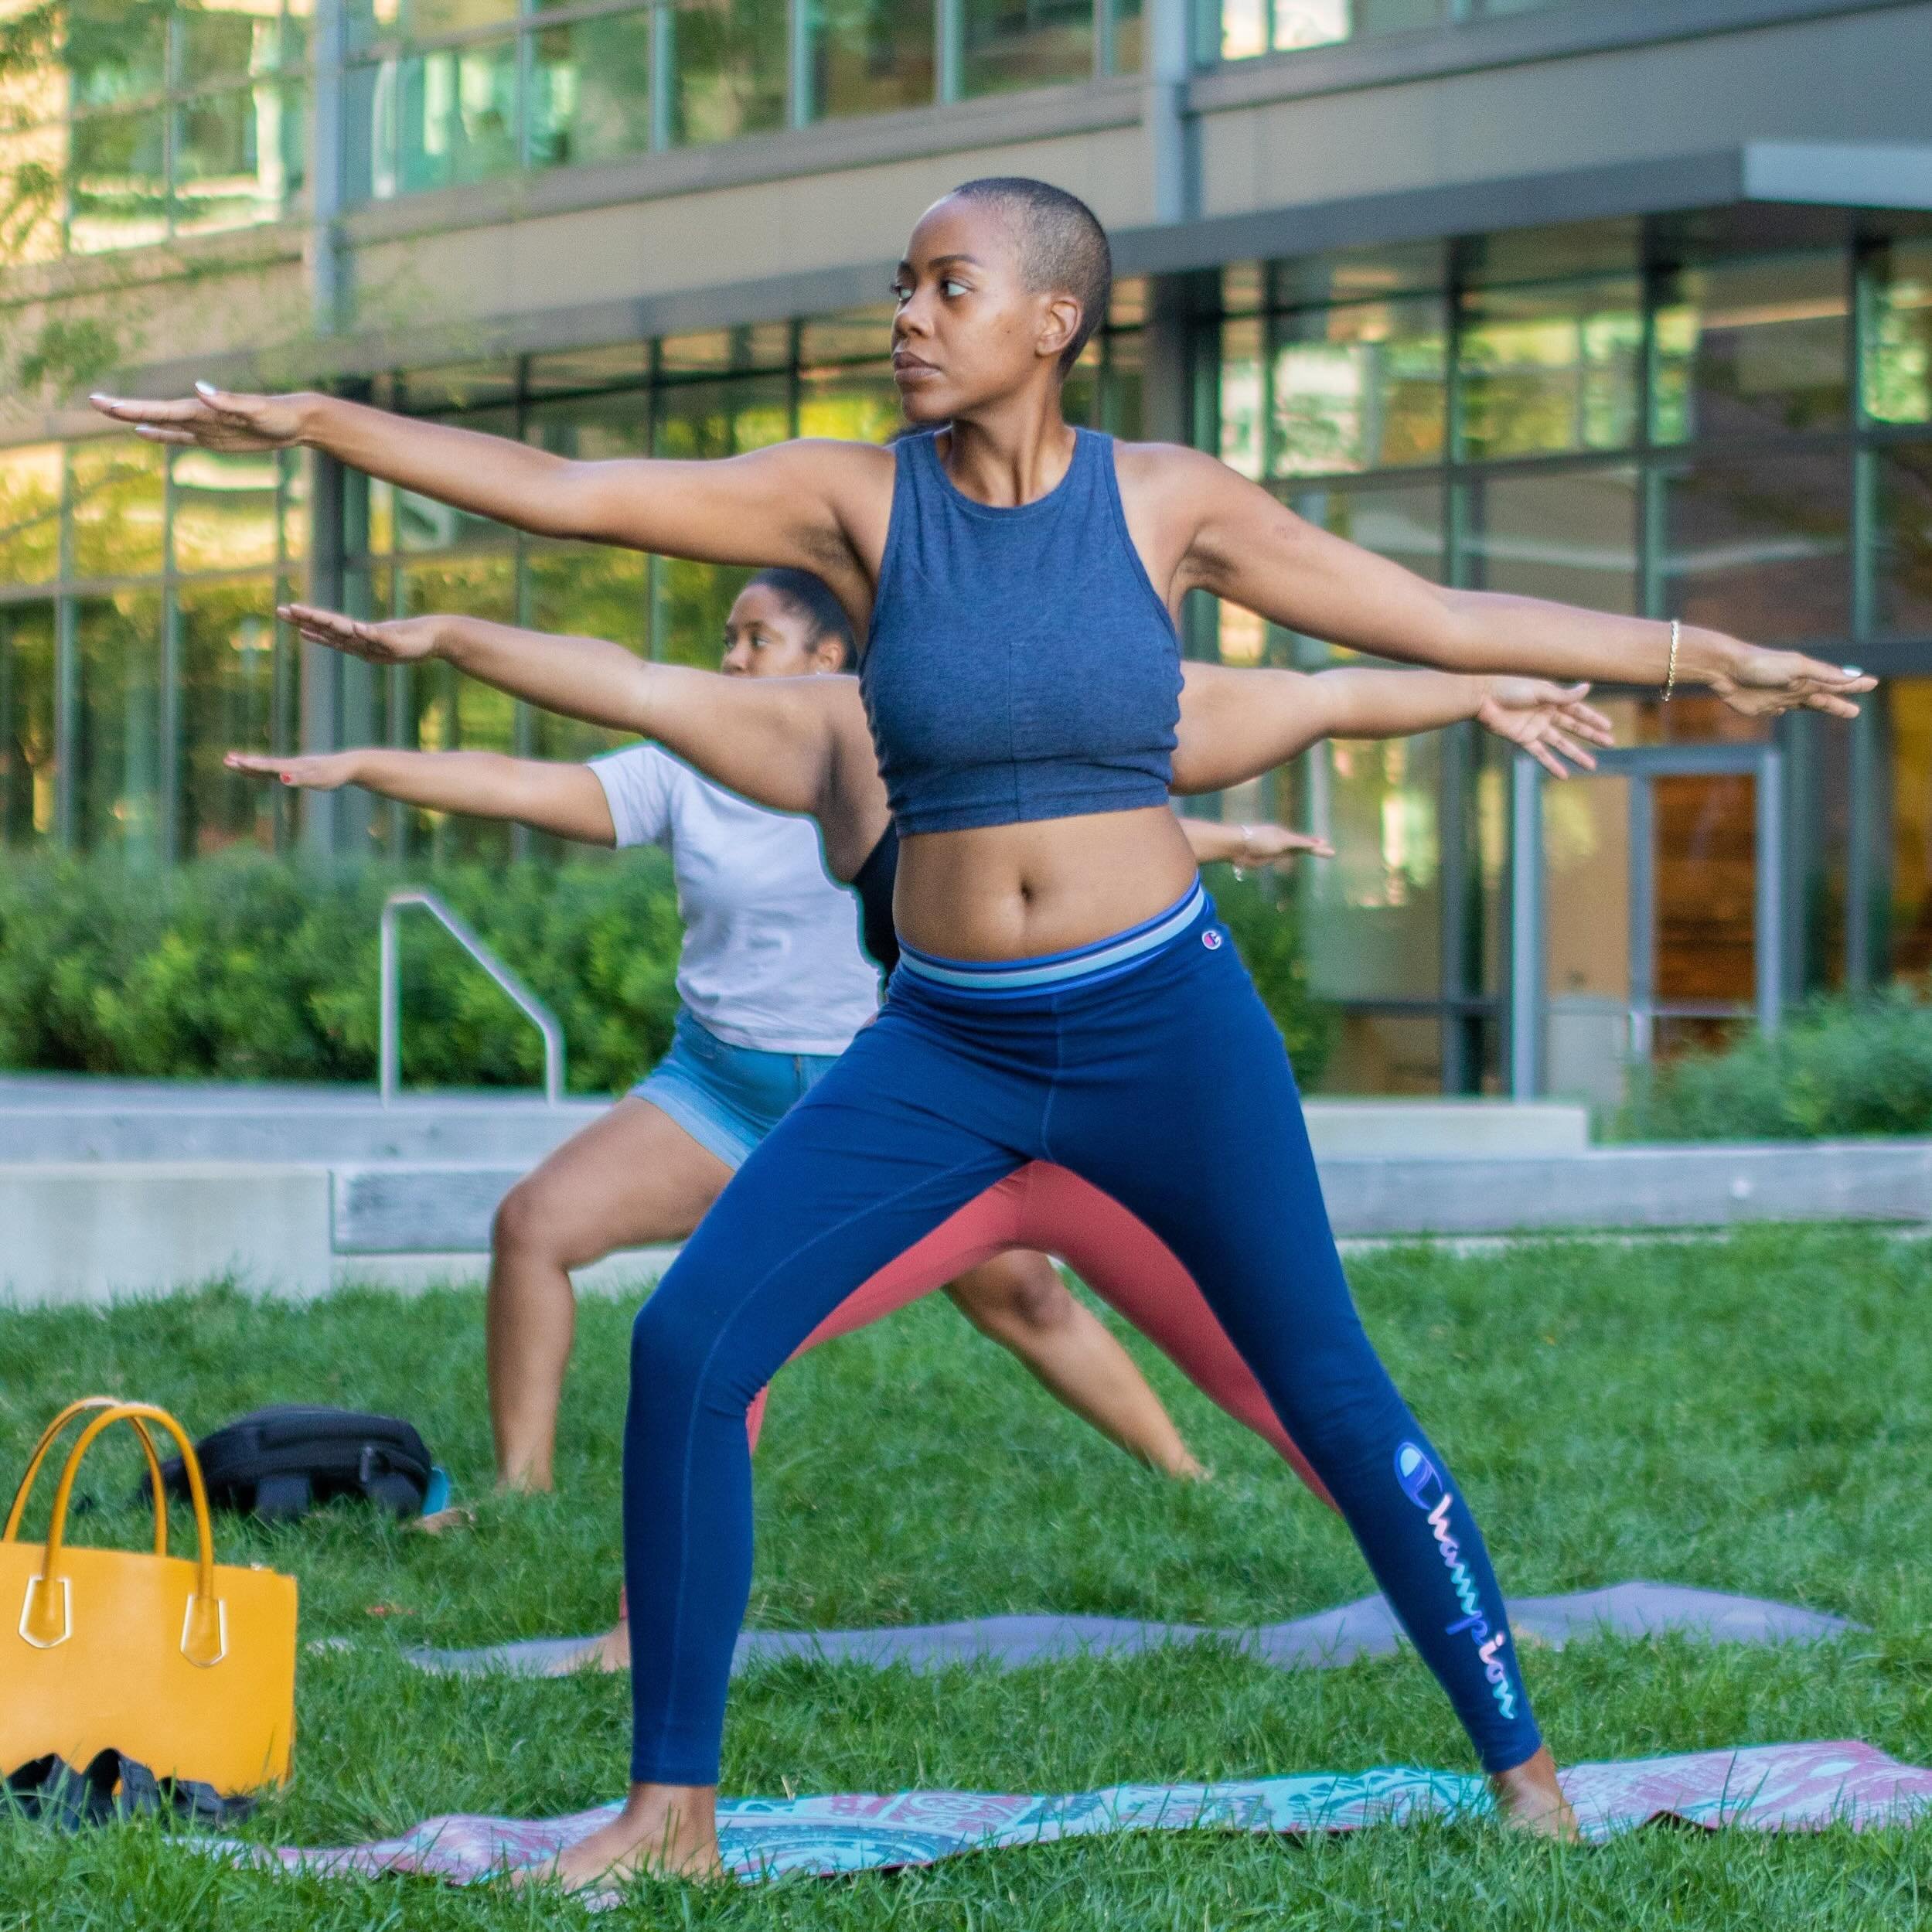 Head outside for @waterfrontwellnessbmore on the Central Plaza 💪. Get moving with this FREE weekly fitness series every Tuesday through Thursday starting TODAY at Harbor Point!

Tues 5:30- Strong on the Lawn with @ceiriousgoals 
Wed 5:30- Pilates wi